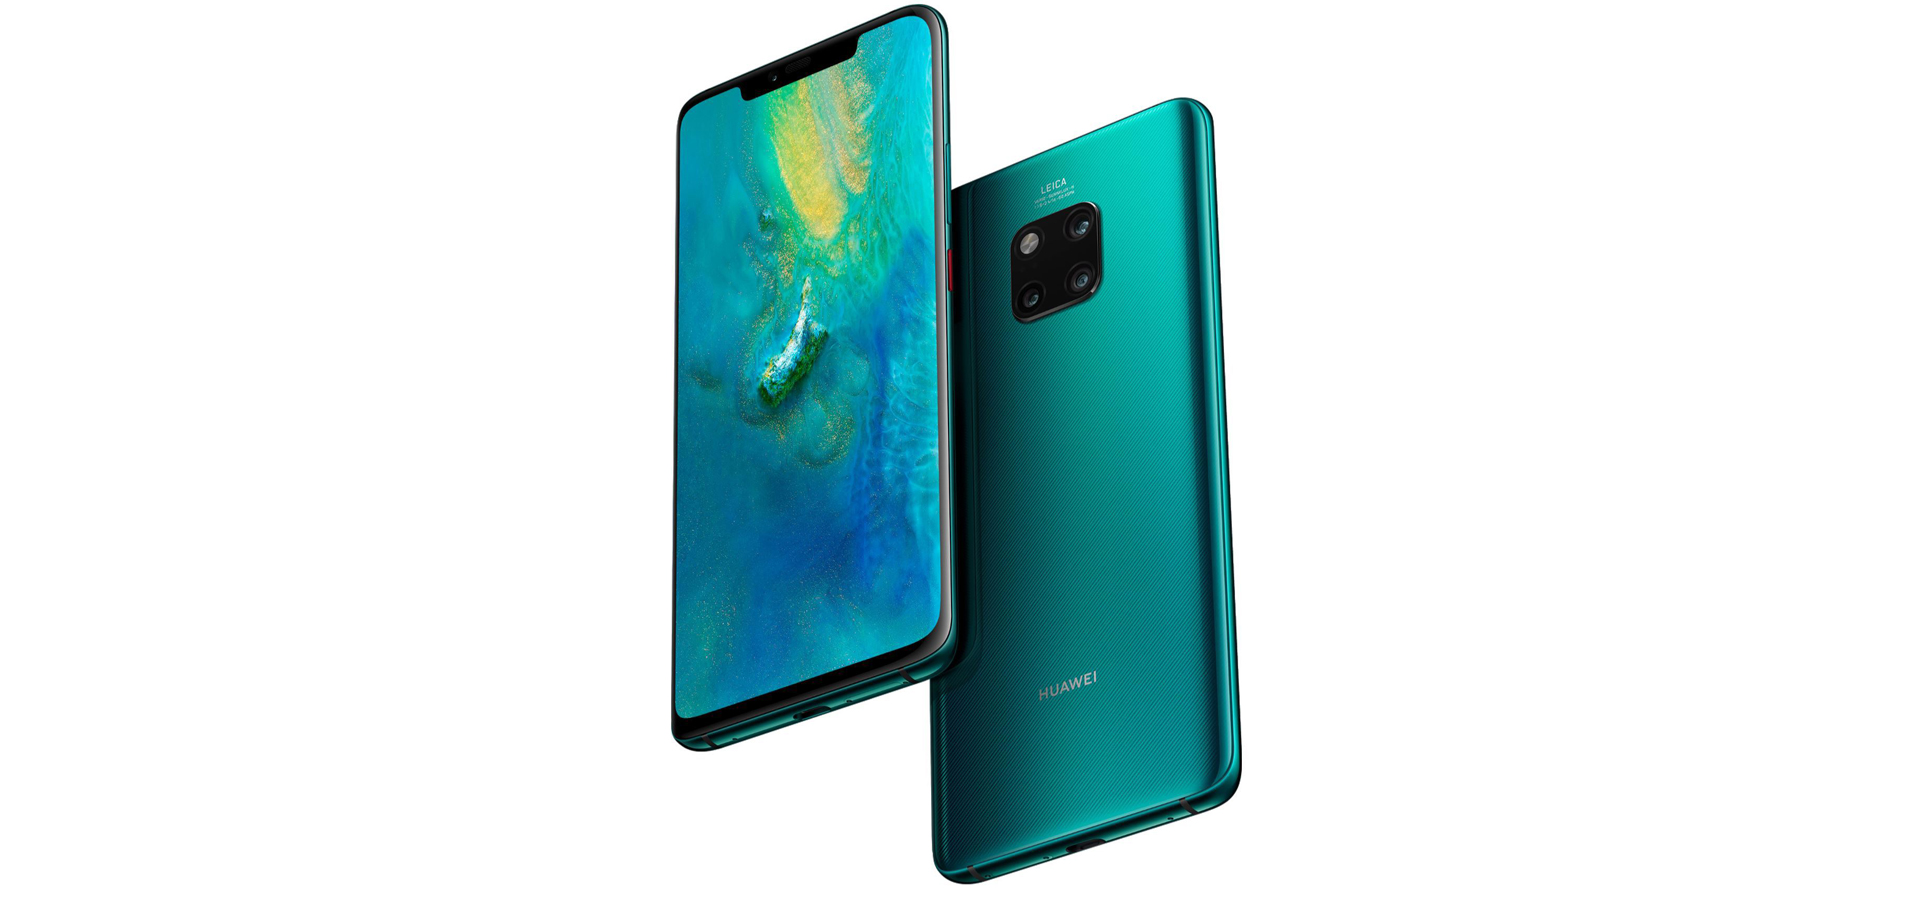 A Glimpse of the Future according to the Huawei Mate 20 Pro